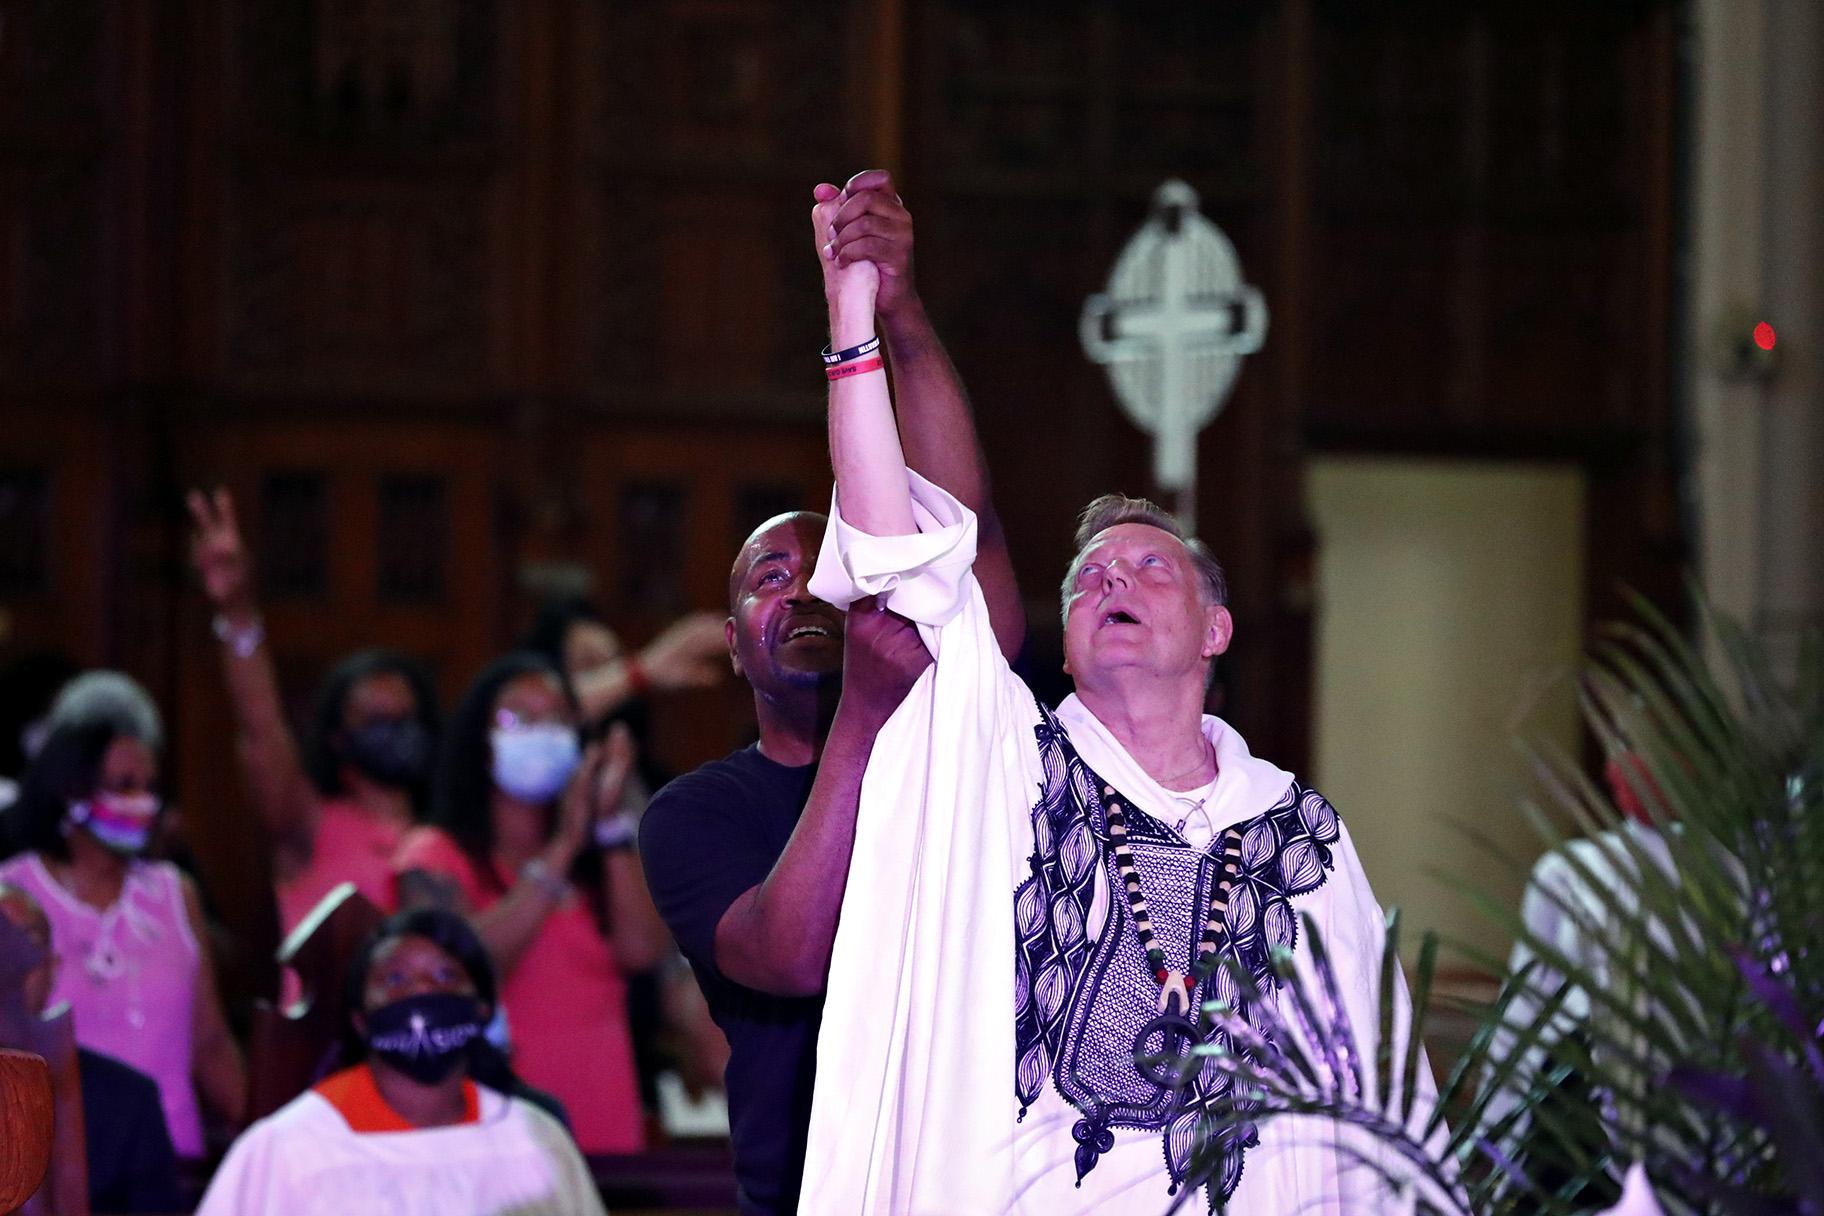 A parishioner raises Rev. Michael Pfleger’s arm as he conducts his first Sunday church service as a senior pastor at St. Sabina Catholic Church following his reinstatement by Archdiocese of Chicago after decades-old sexual abuse allegations against minors, Sunday, June 6, 2021, in the Auburn Gresham neighborhood in Chicago. (AP Photo / Shafkat Anowar)